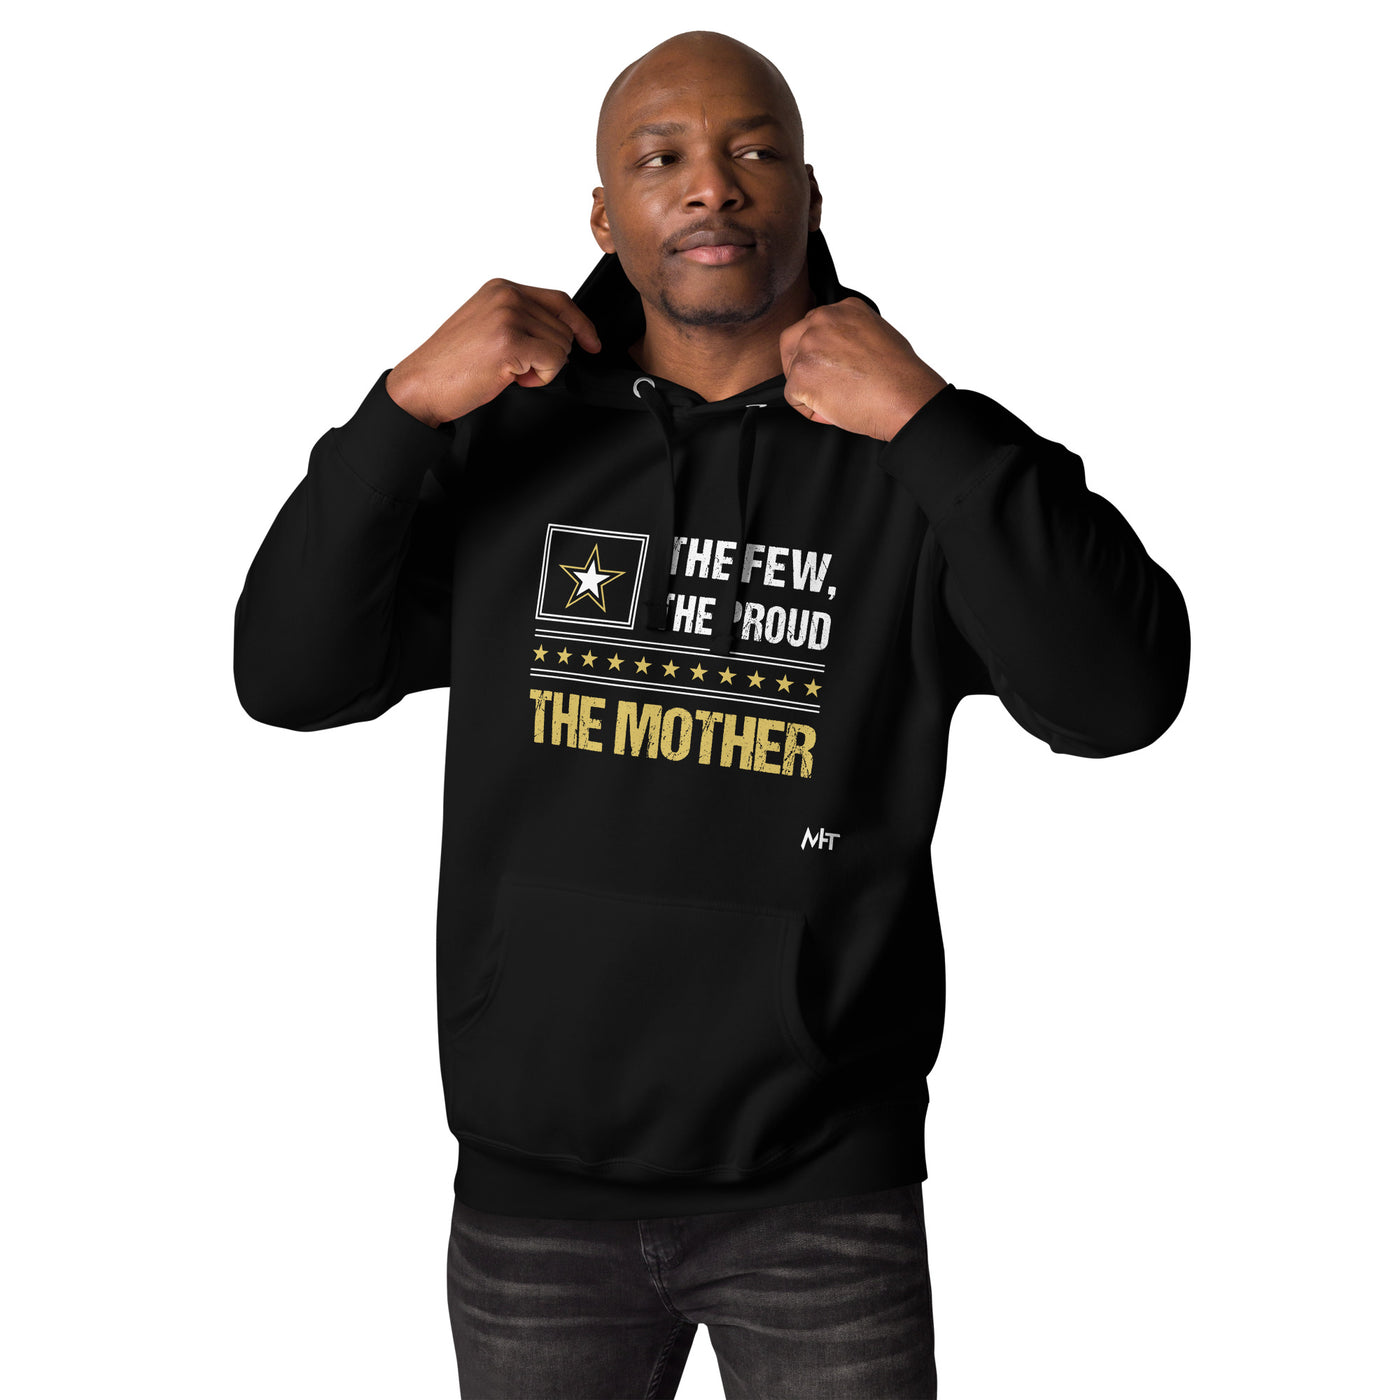 The few, the proud, the Mother - Unisex Hoodie